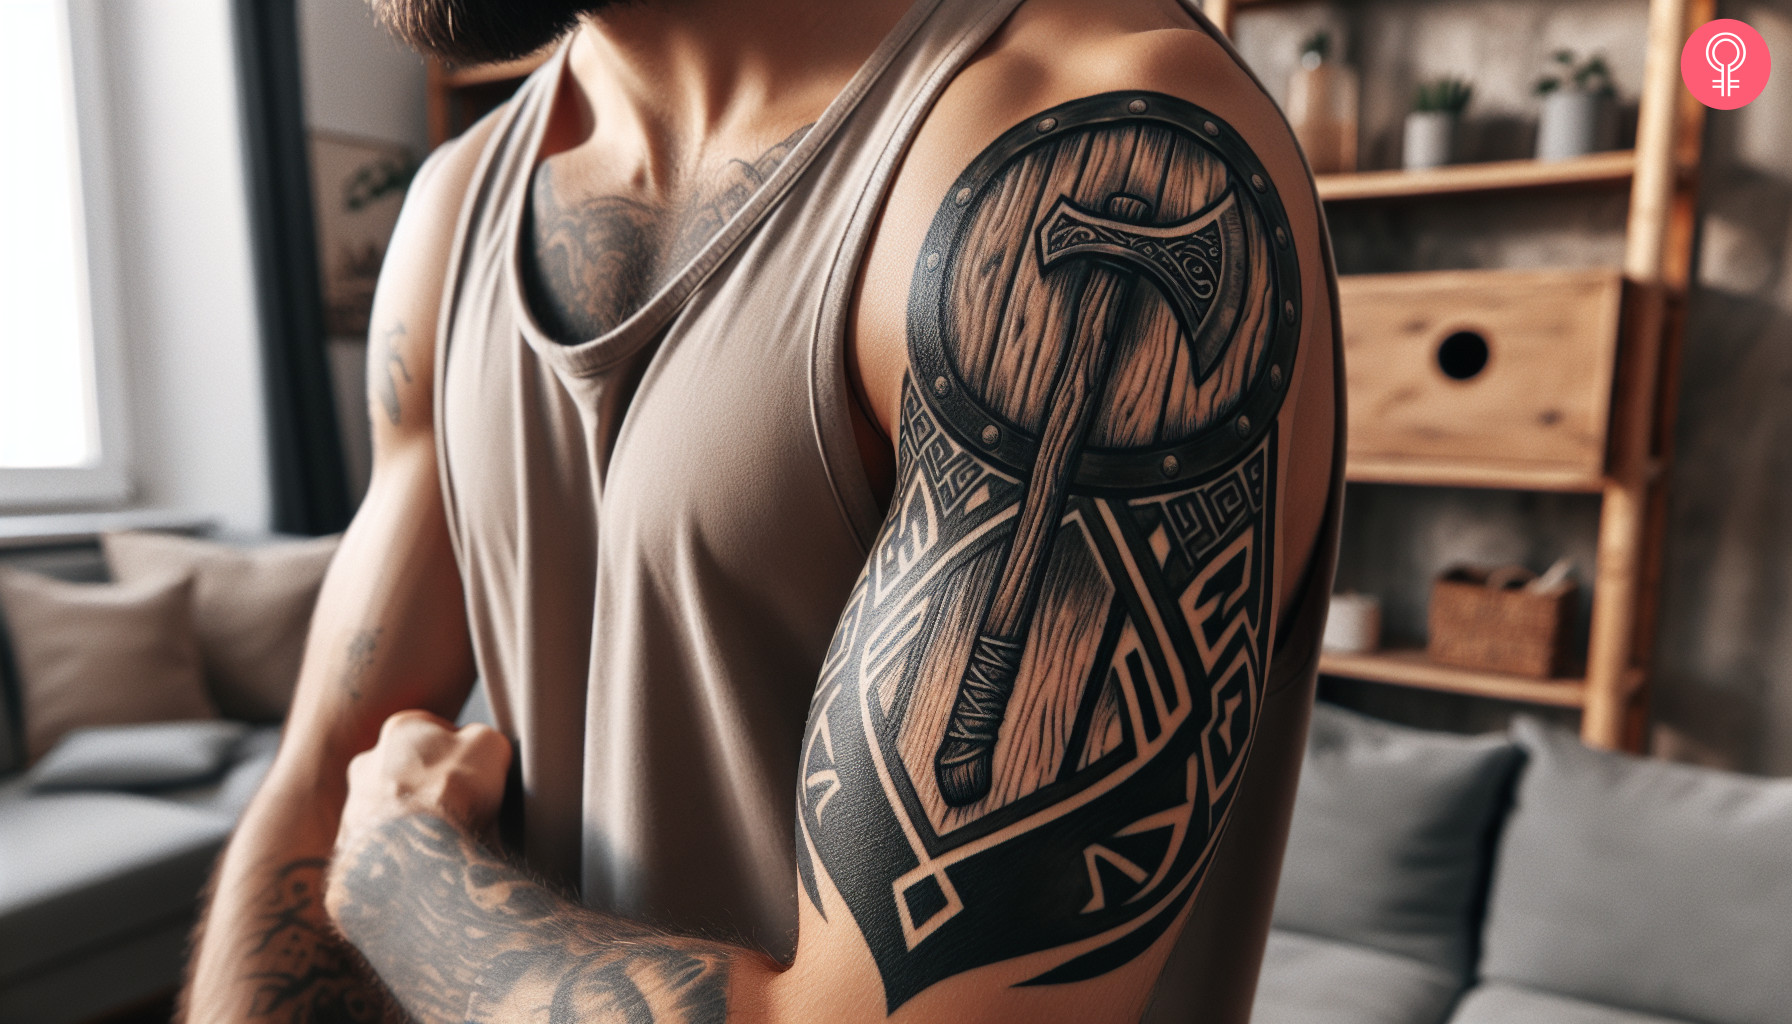 A man with a tattoo of a wooden Viking shield and axe on his upper arm